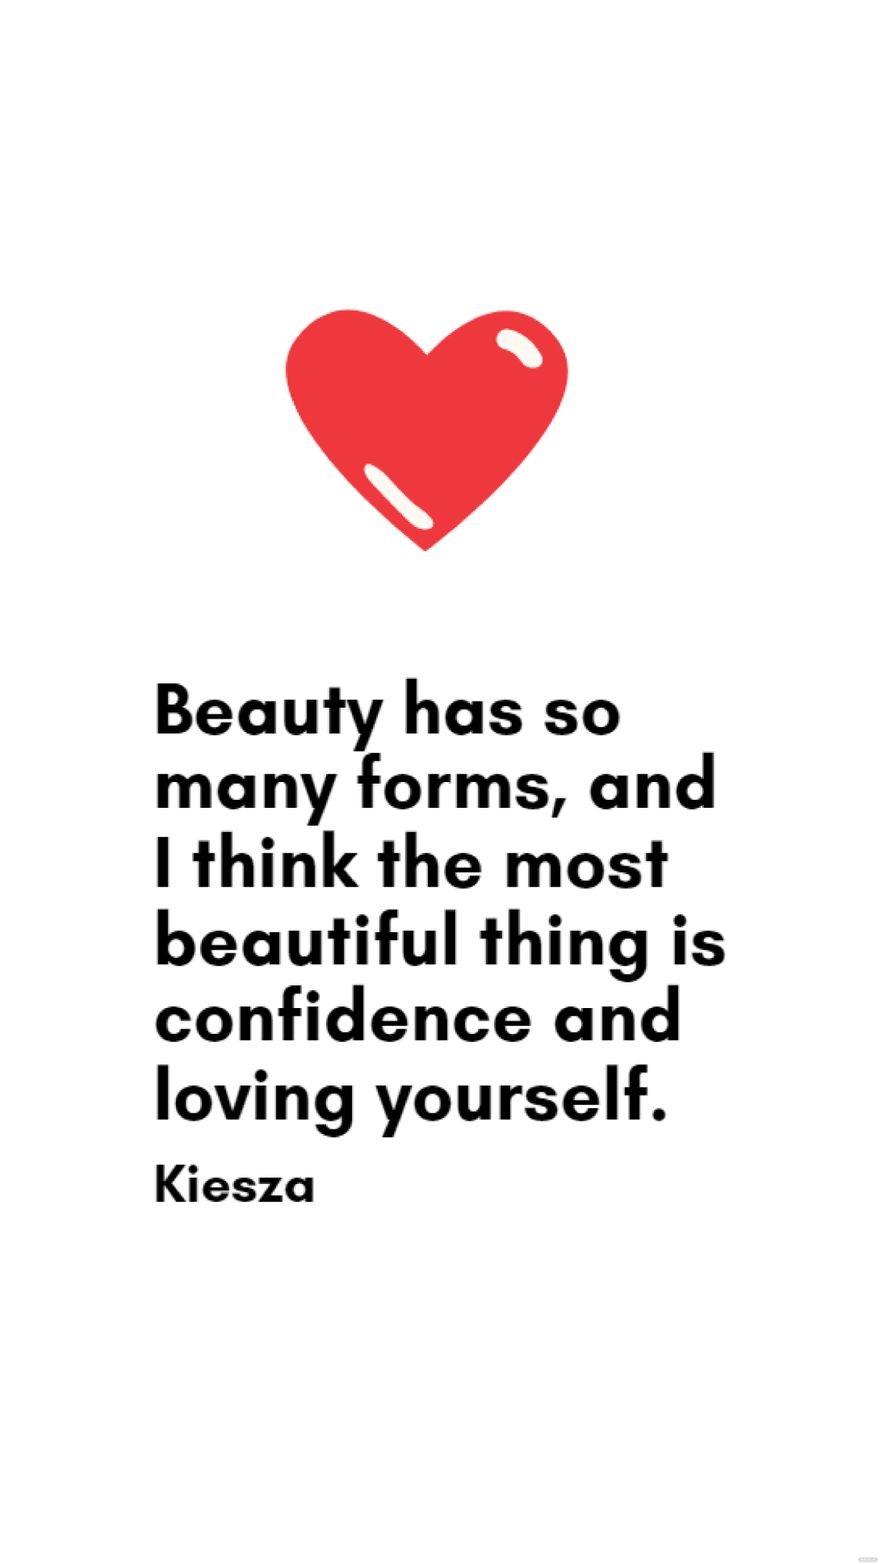 Kiesza - Beauty has so many forms, and I think the most beautiful thing is confidence and loving yourself.